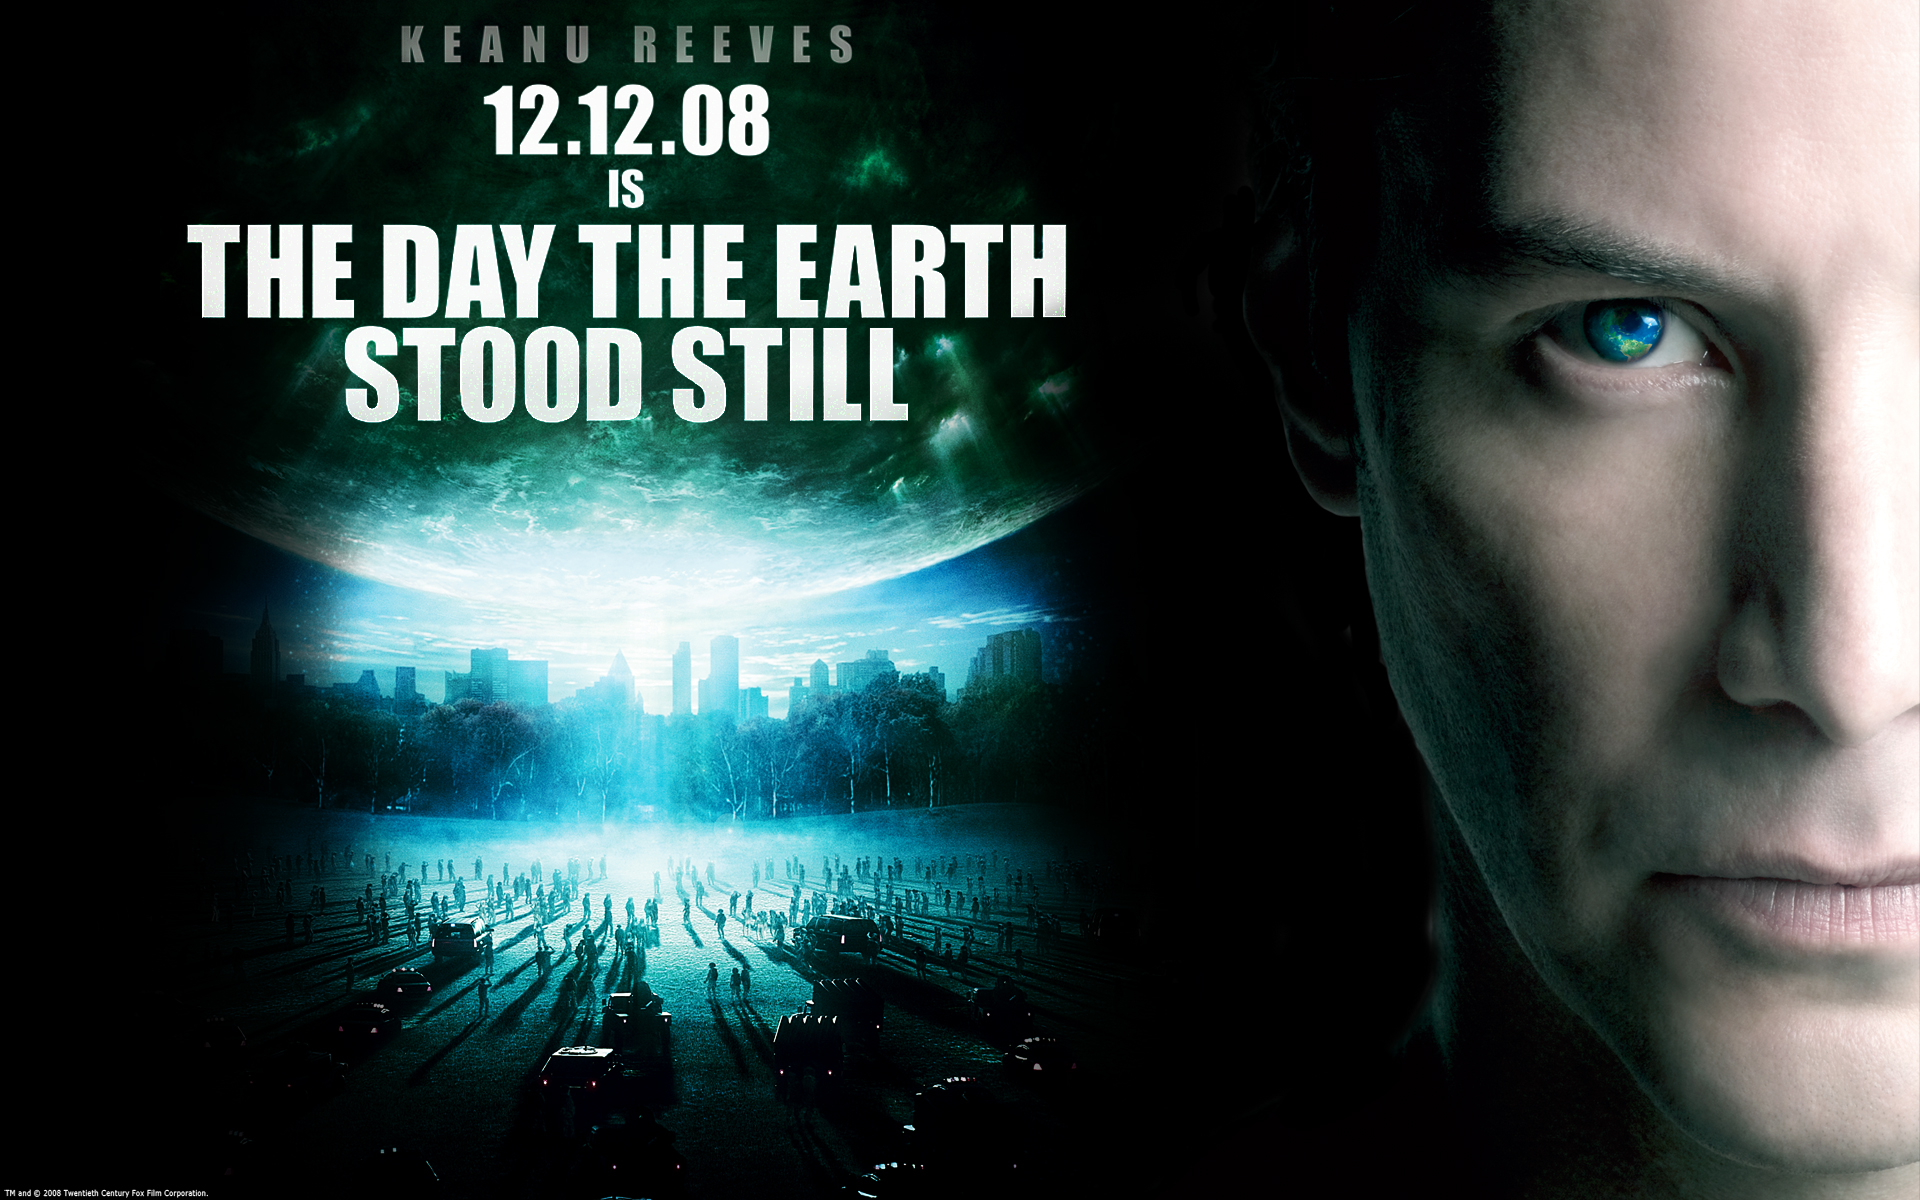 The Day The Earth Stood Still Wallpapers - Wallpaper Cave.